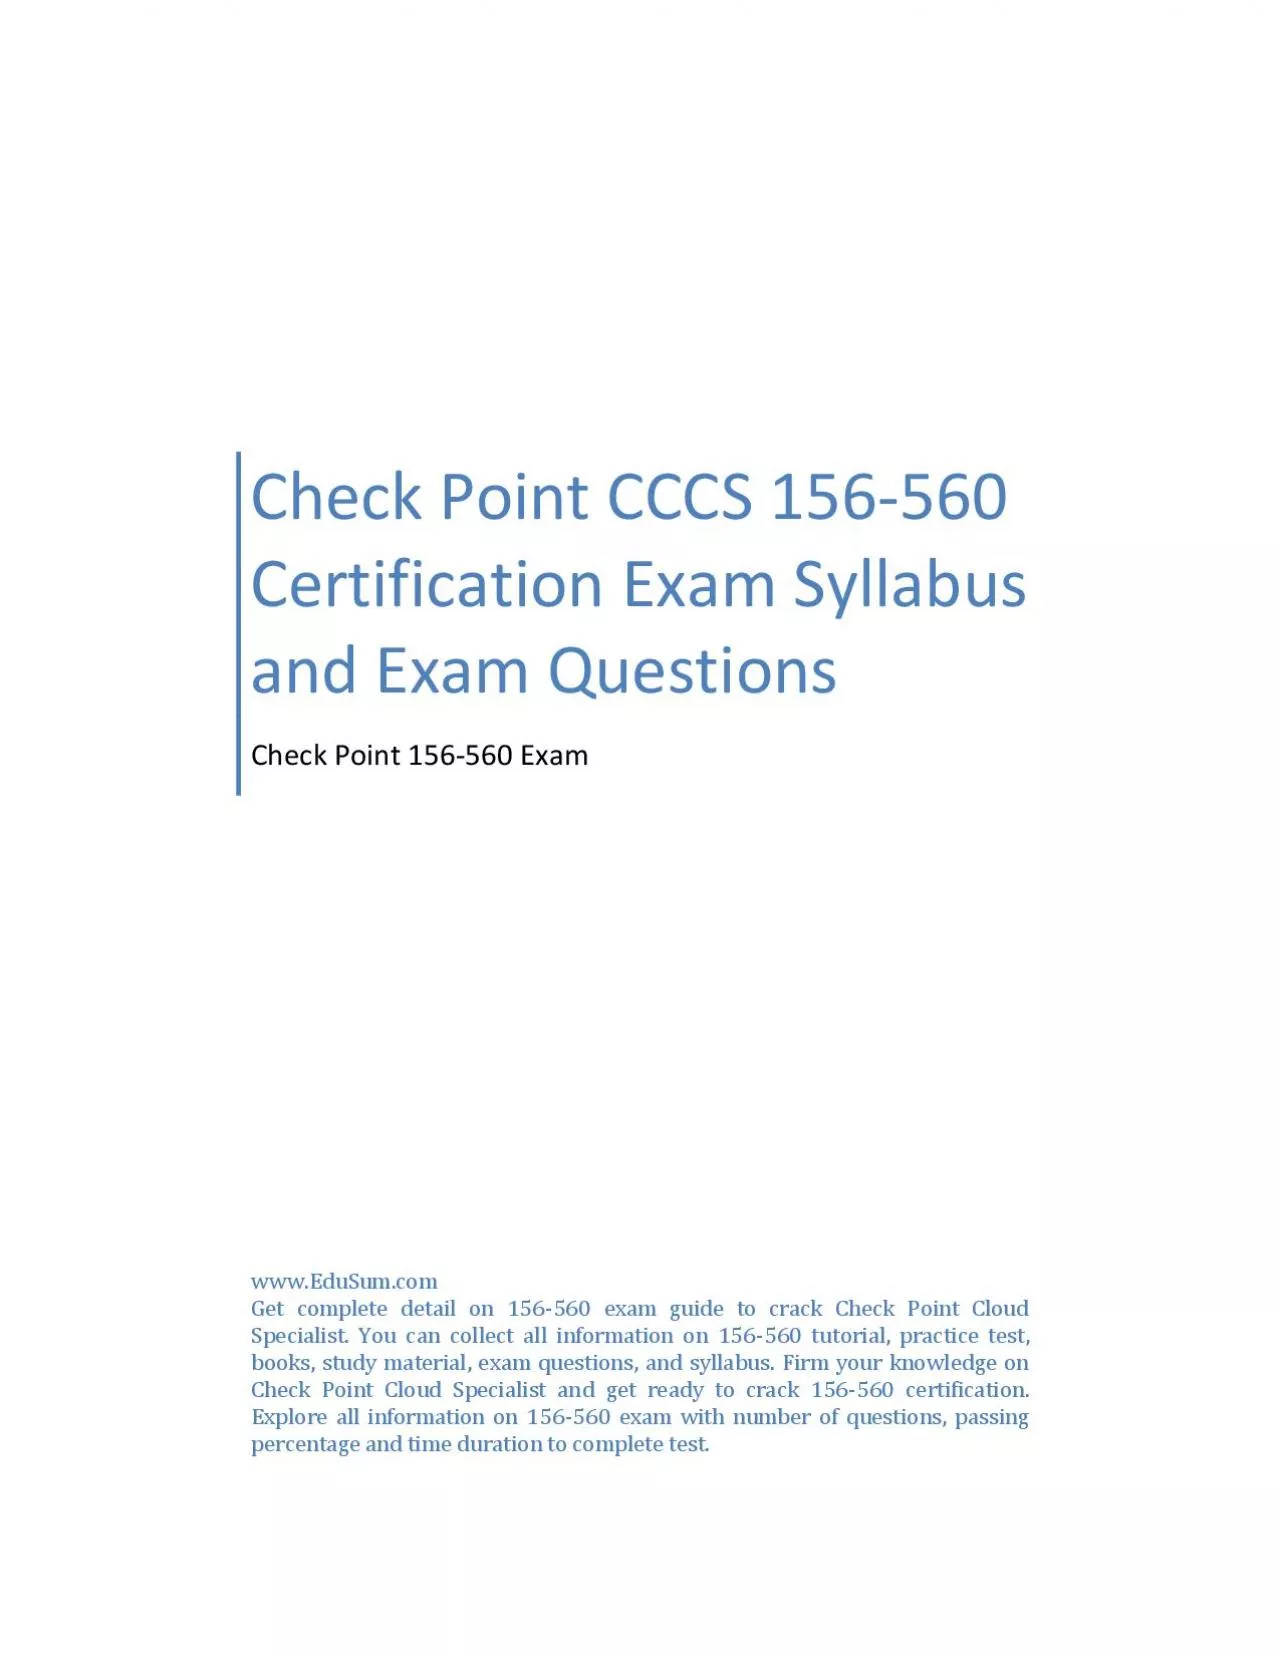 Check Point CCCS 156-560 Certification Exam Syllabus and Exam Questions